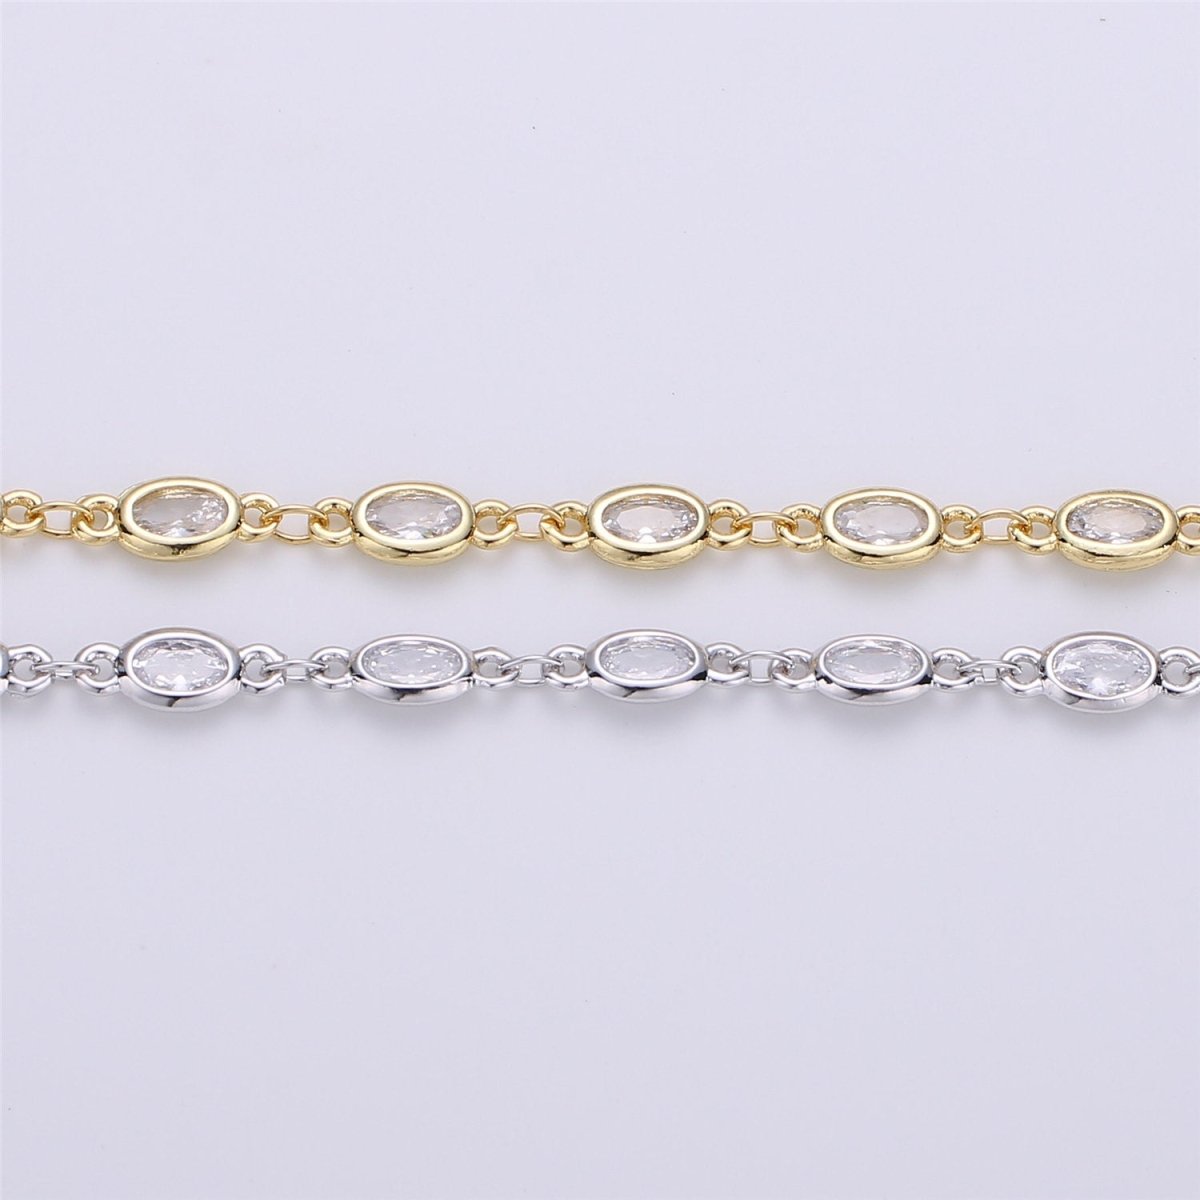 24K Gold Filled Clear Cubic Zirconia Chains, Oval Bezel Chains Silver 1 Yard 5mm CZ Connectors Link for Rosary Necklace Supply, White Gold Filled DESIGNED Chain | ROLL-104, ROLL-105 Clearance Pricing - DLUXCA